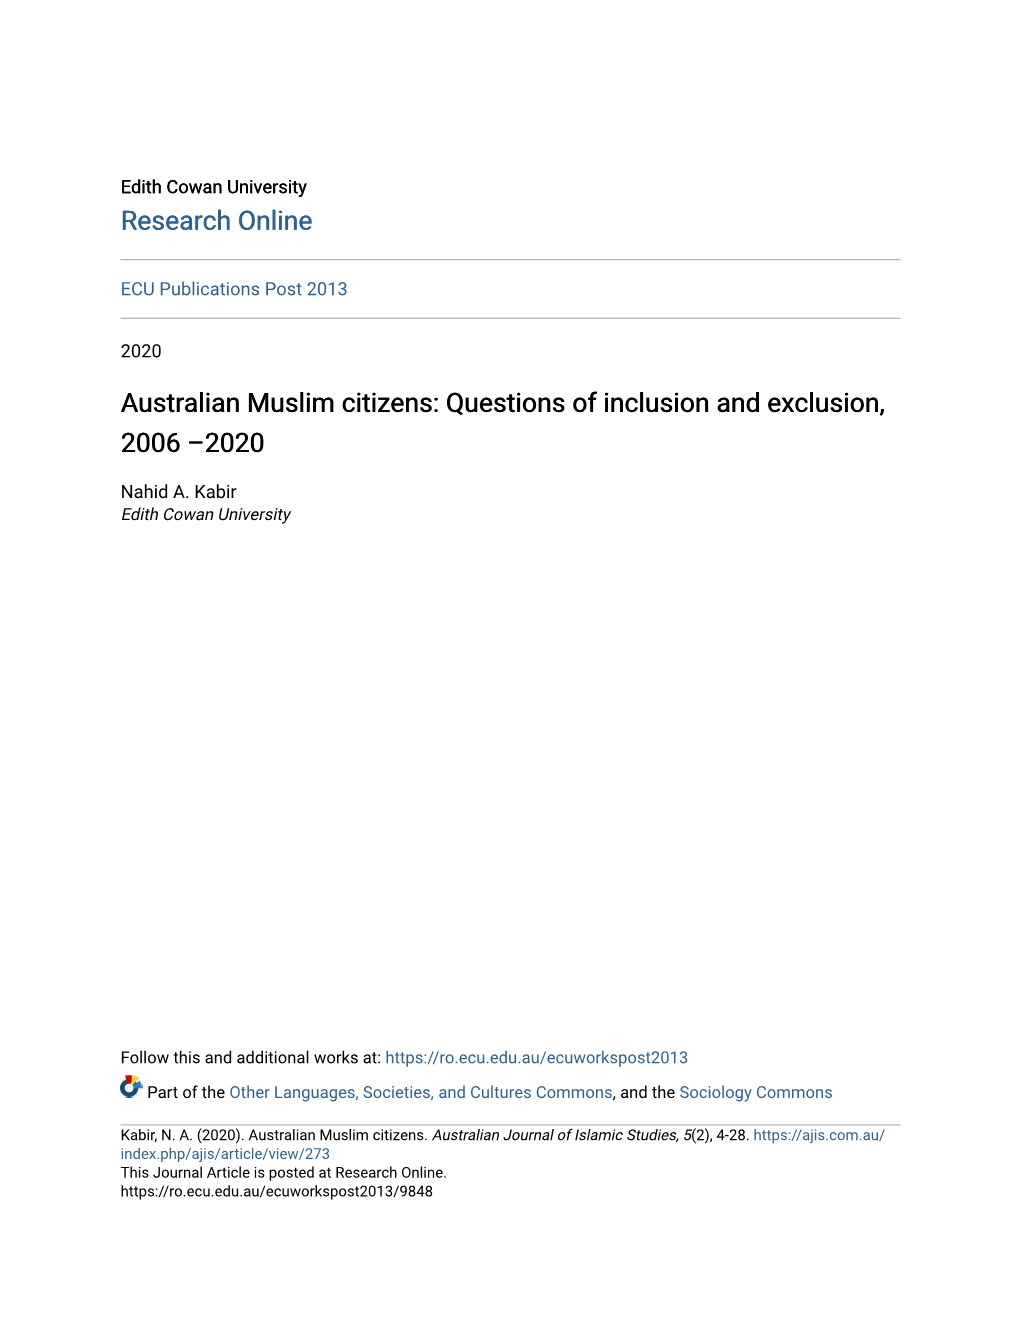 Australian Muslim Citizens: Questions of Inclusion and Exclusion, 2006 –2020